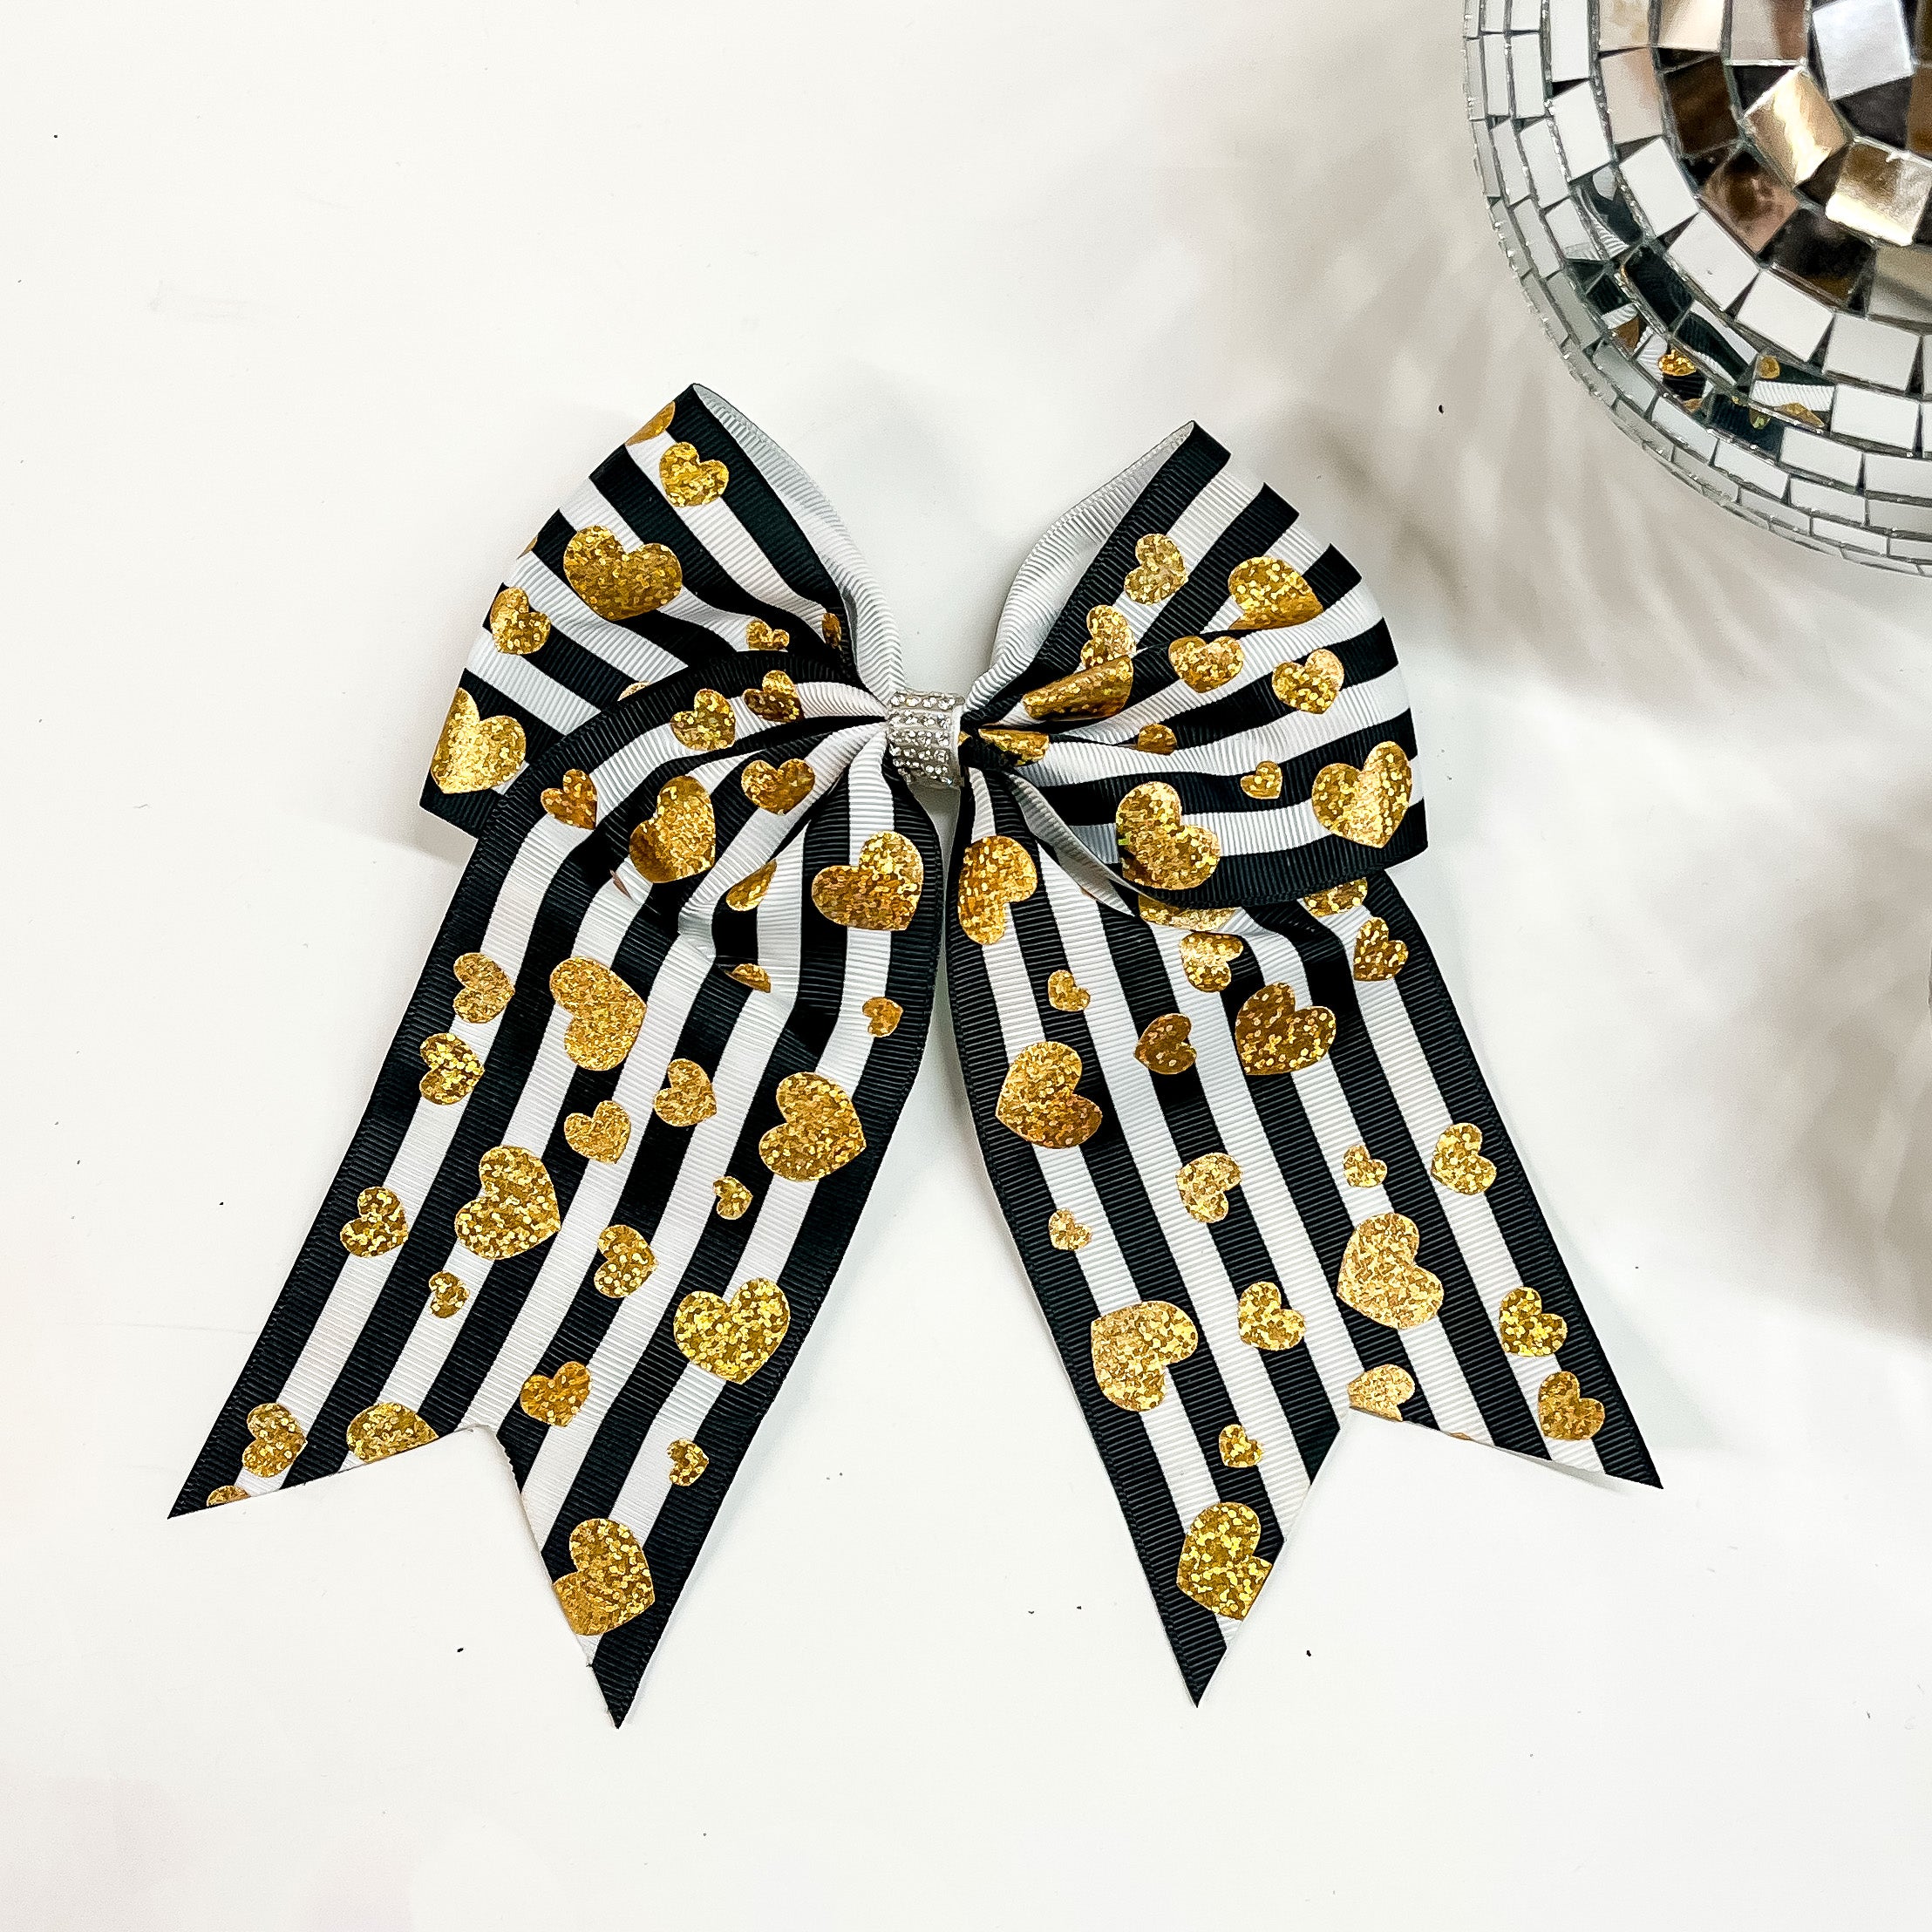 This is a black and white striped bow with gold hearts all over and the center of the bow has clear rhinestones. This bow is taken on a white background with a disco ball in the side as decor.